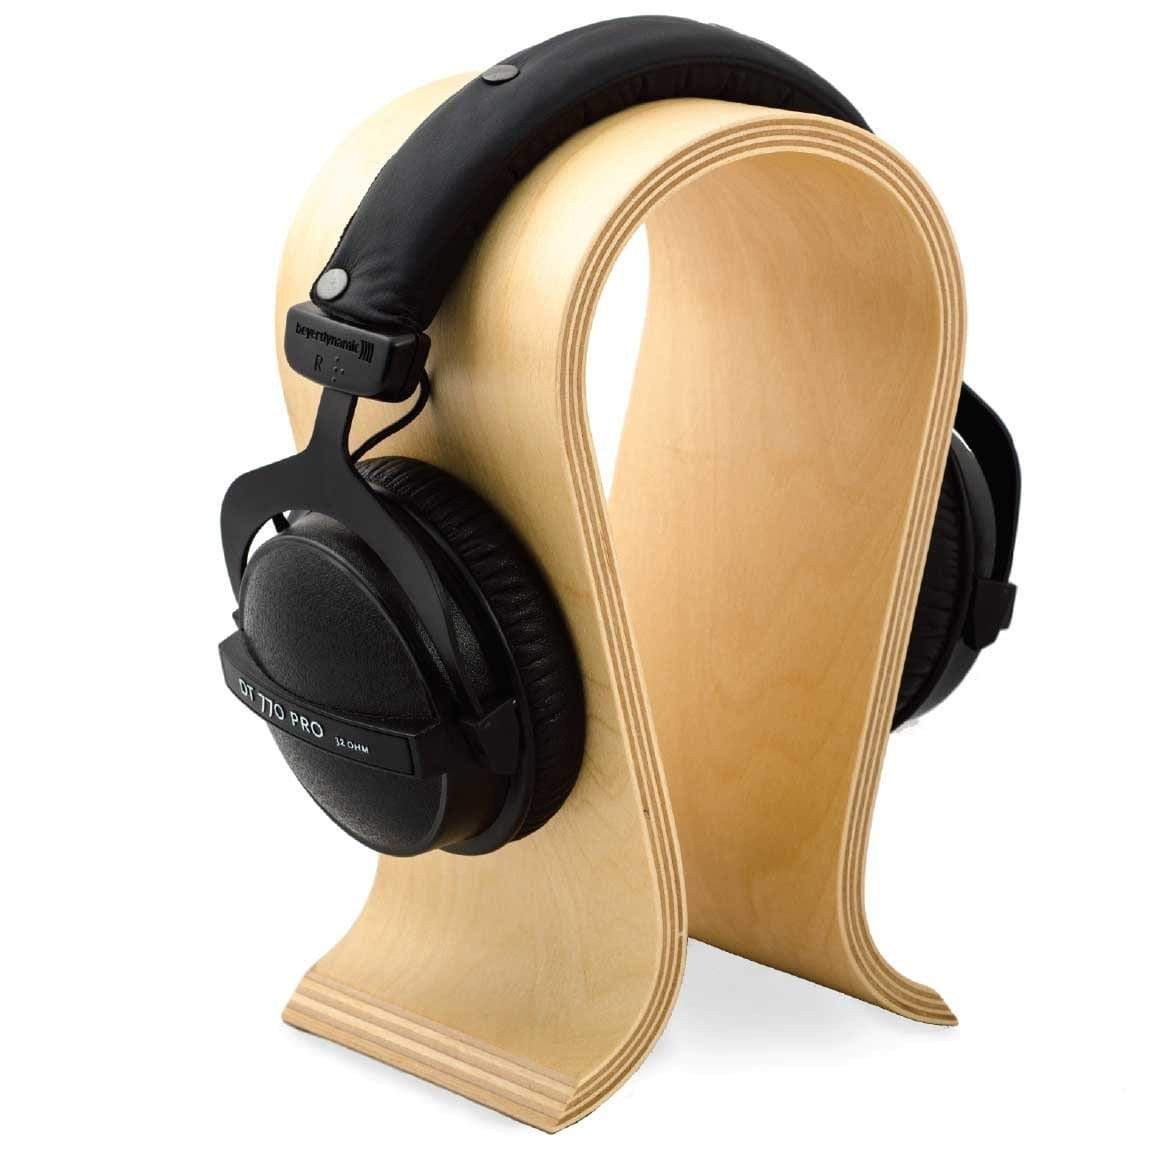 Headphone-Zone-Omega-Handcrafted Wooden Headphone Stand-Birch